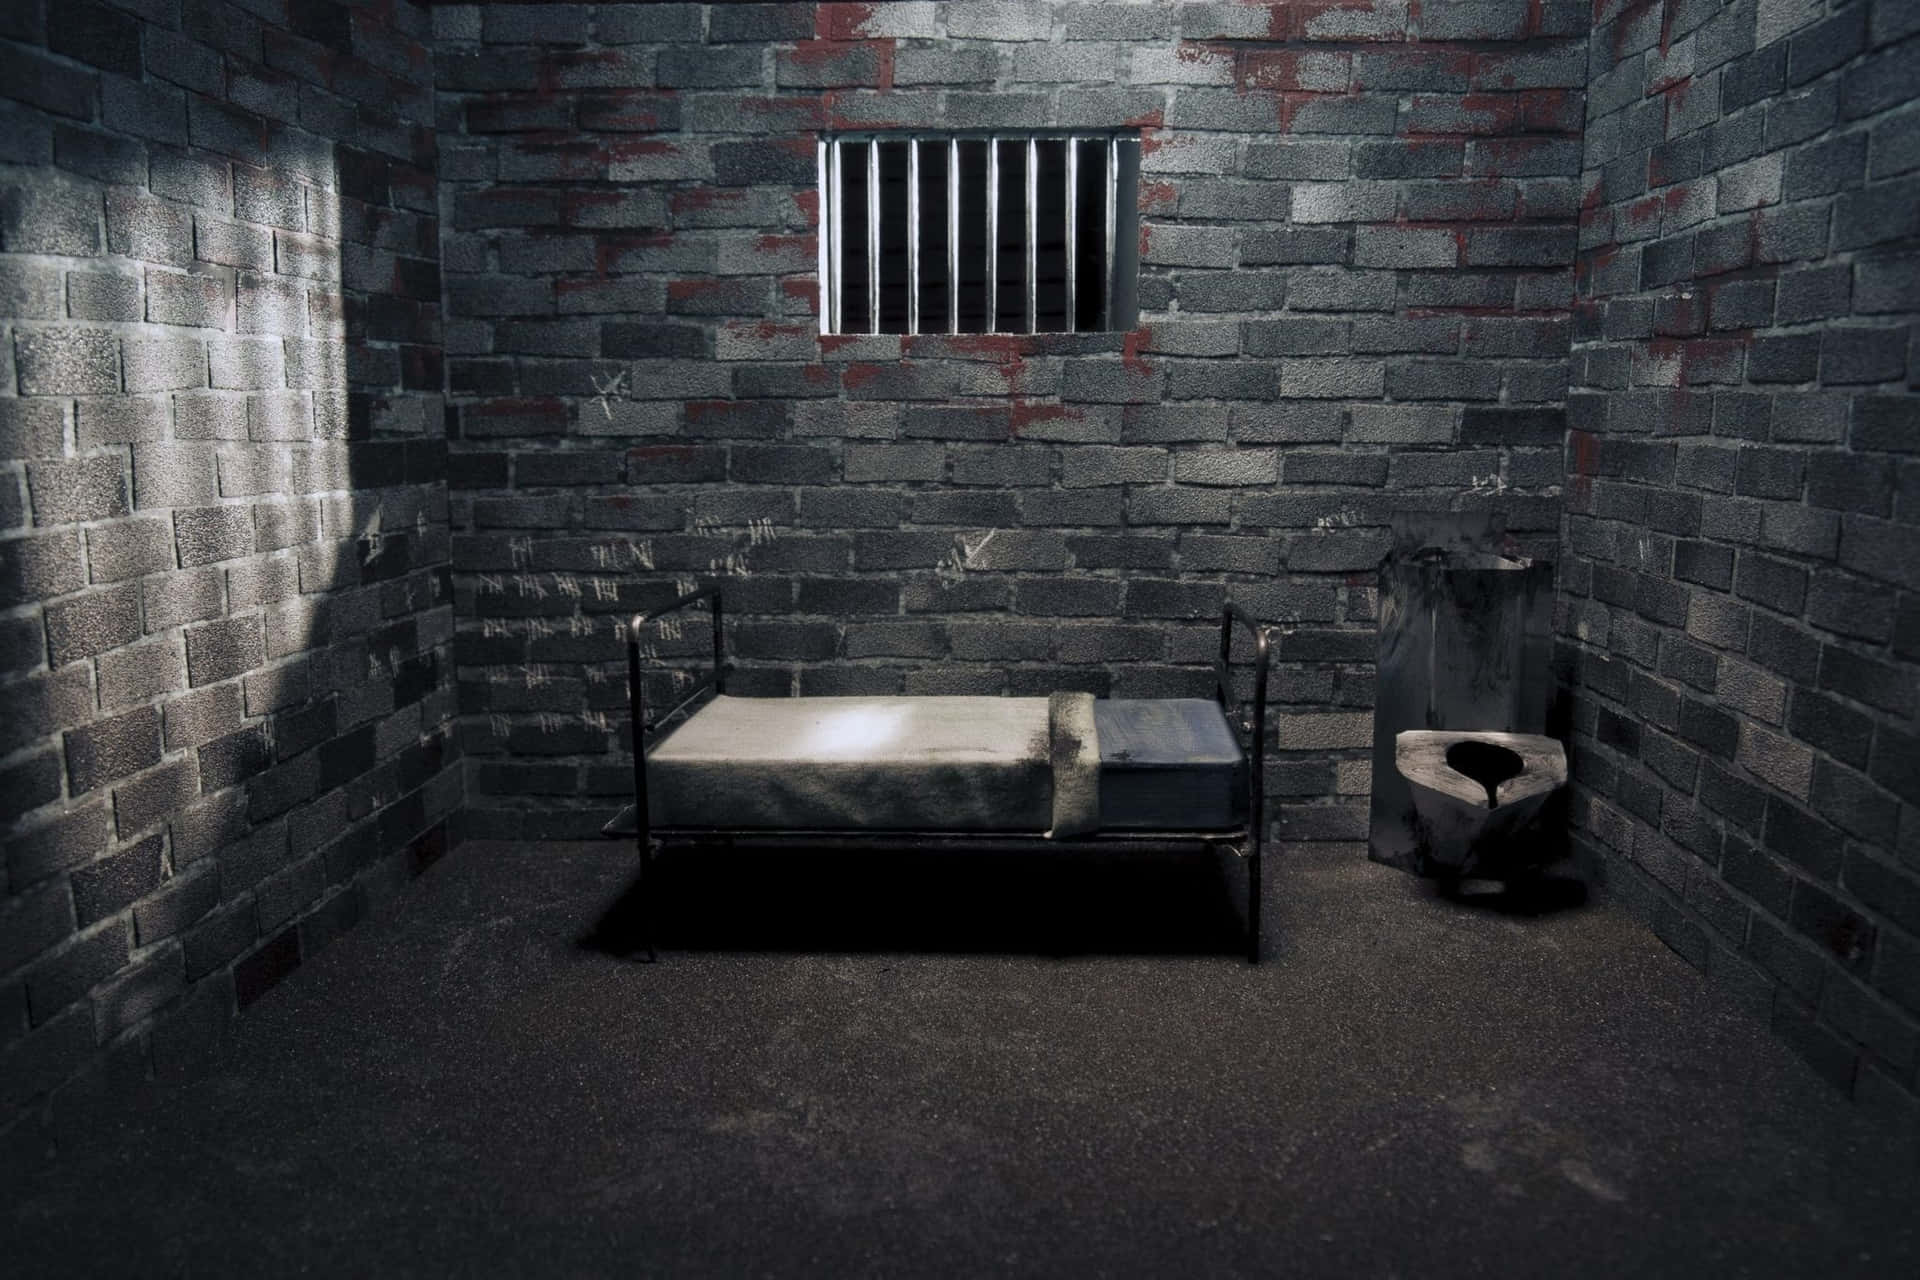 Download A Bed In A Prison Cell | Wallpapers.com